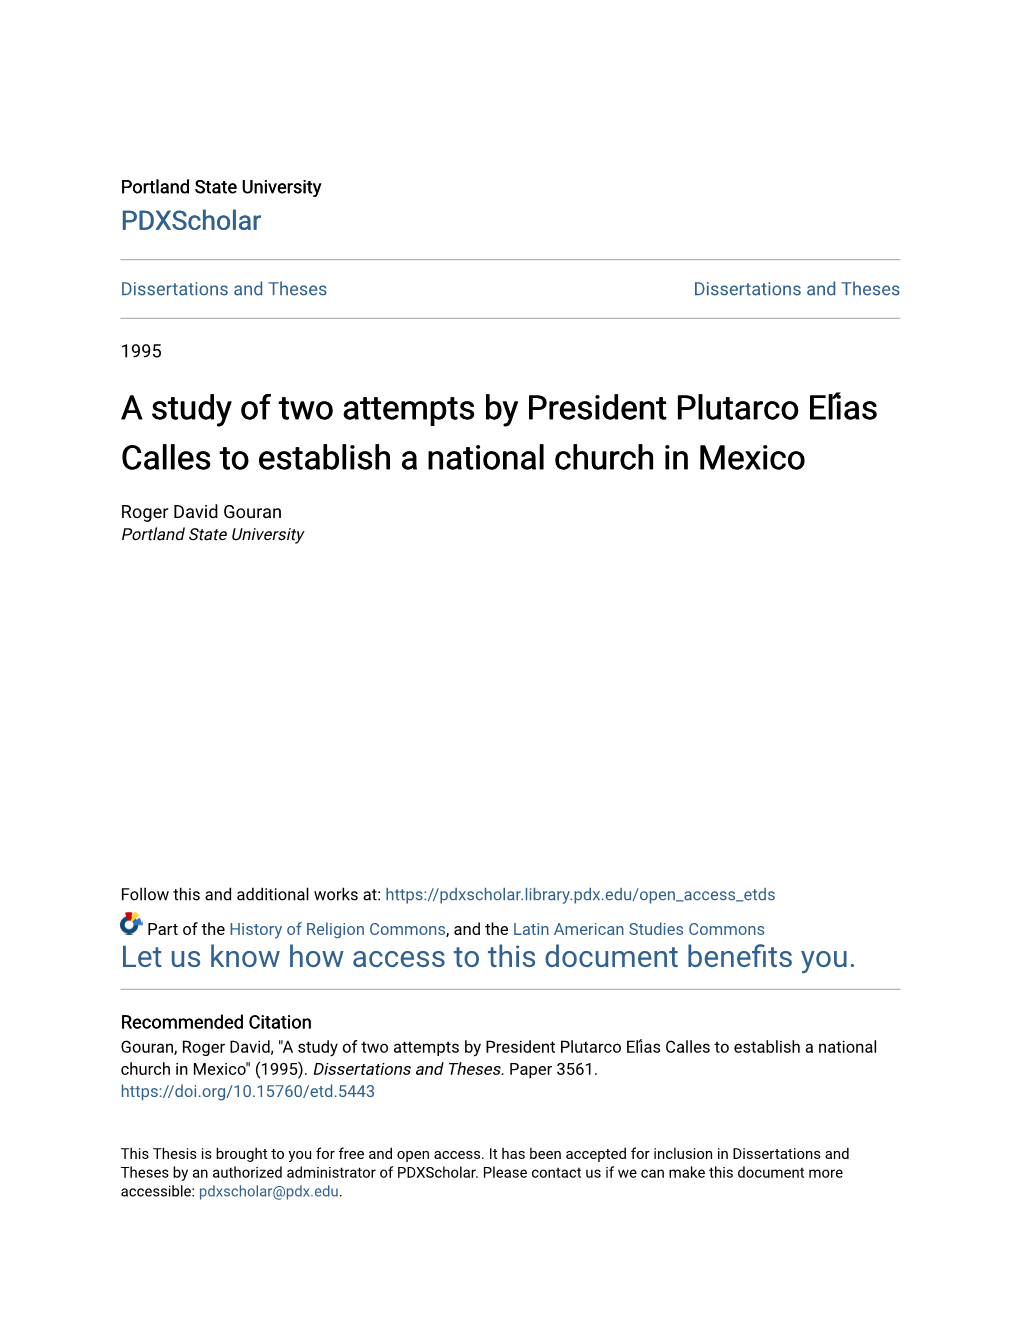 A Study of Two Attempts by President Plutarco Elías Calles